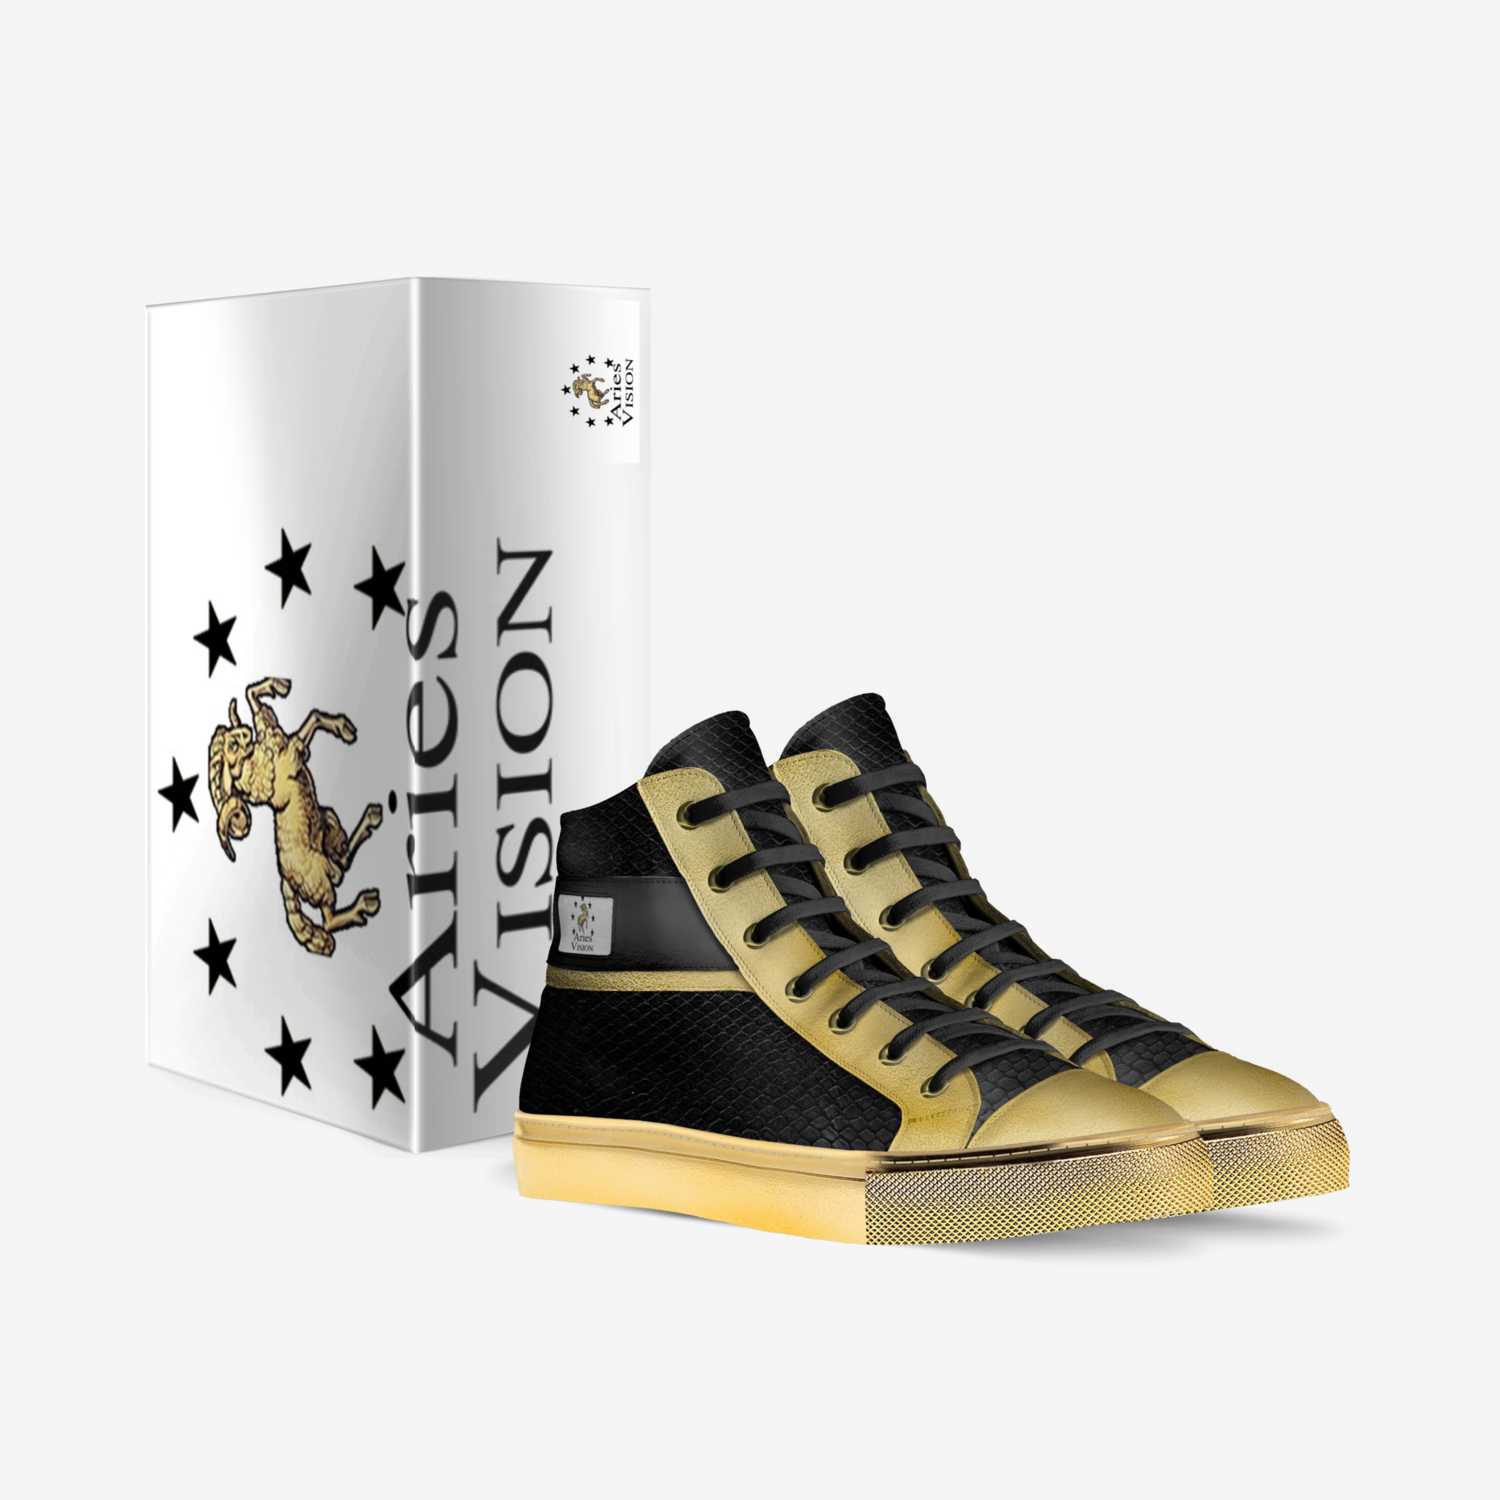 Aries Vision custom made in Italy shoes by Reynaldy Laporte | Box view